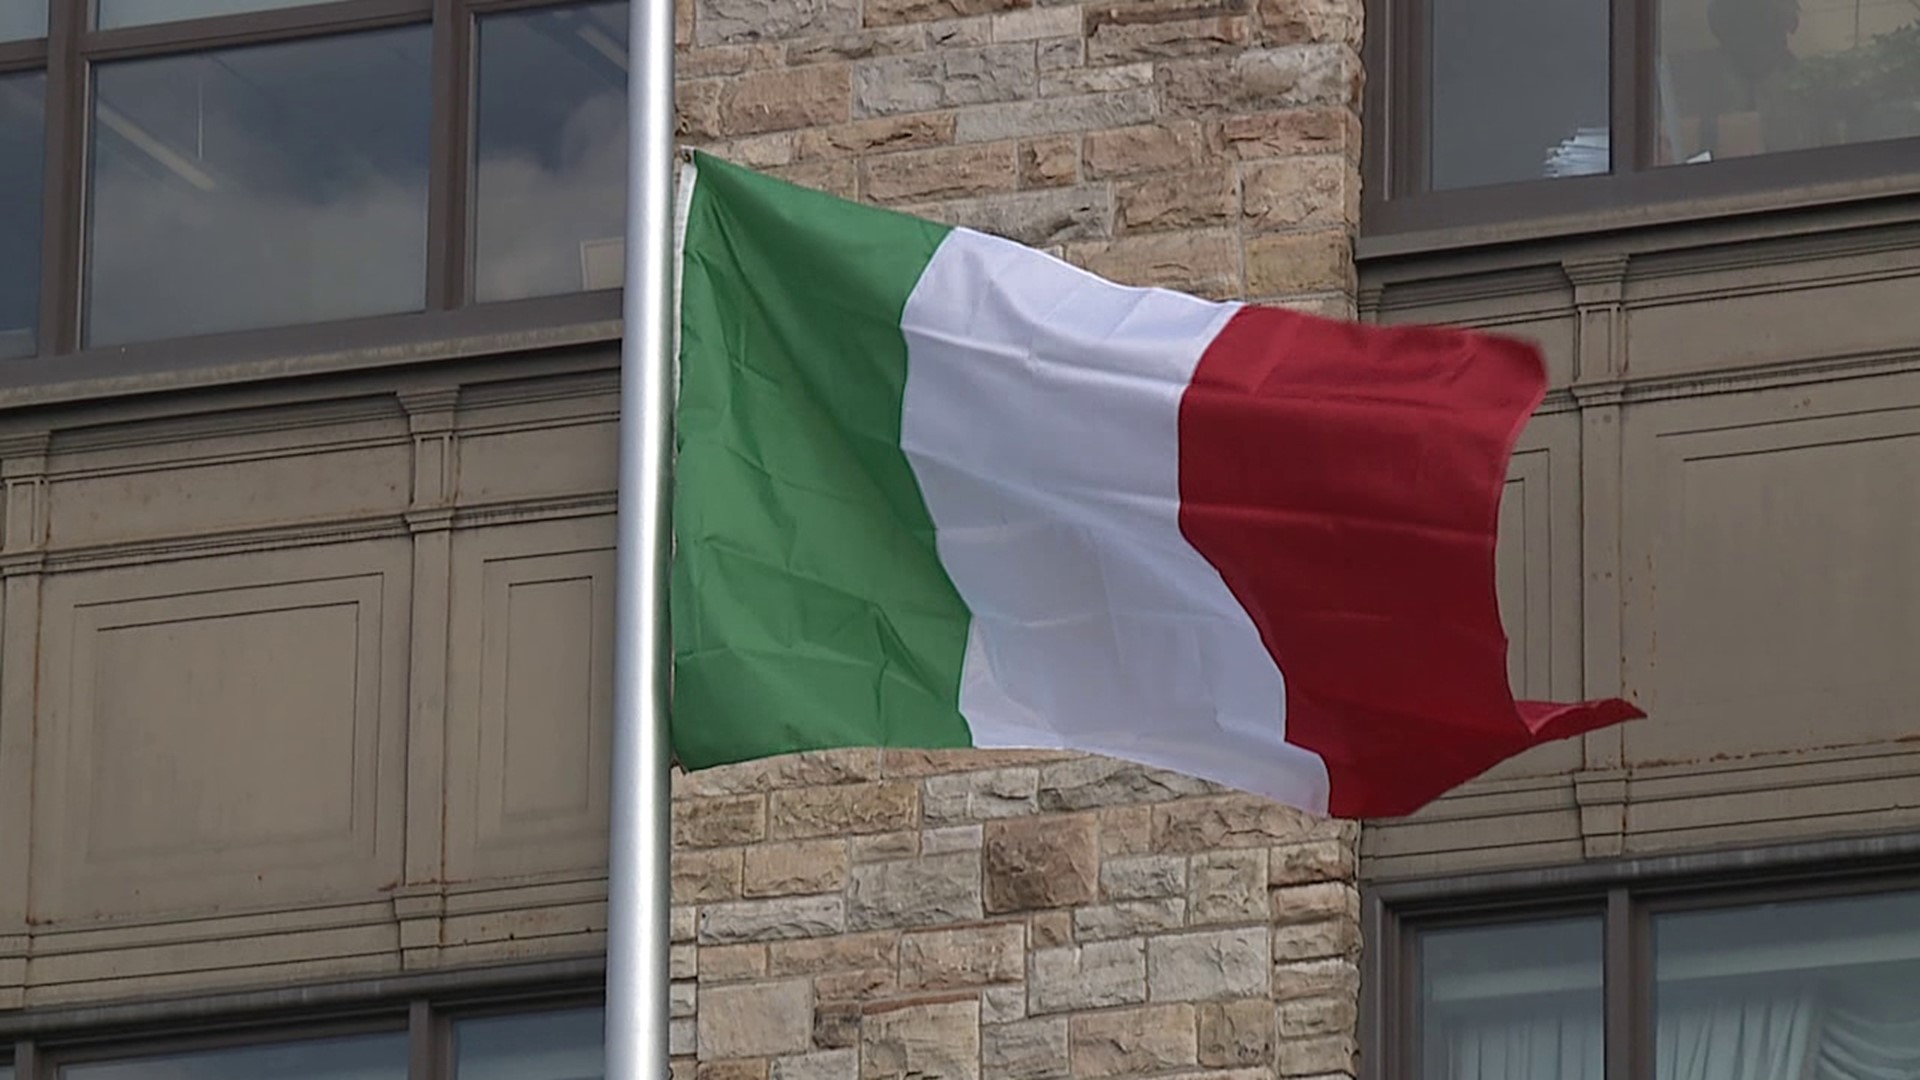 The Italian flag was raised in Courthouse Square Monday afternoon ahead of the Labor Day weekend festival.